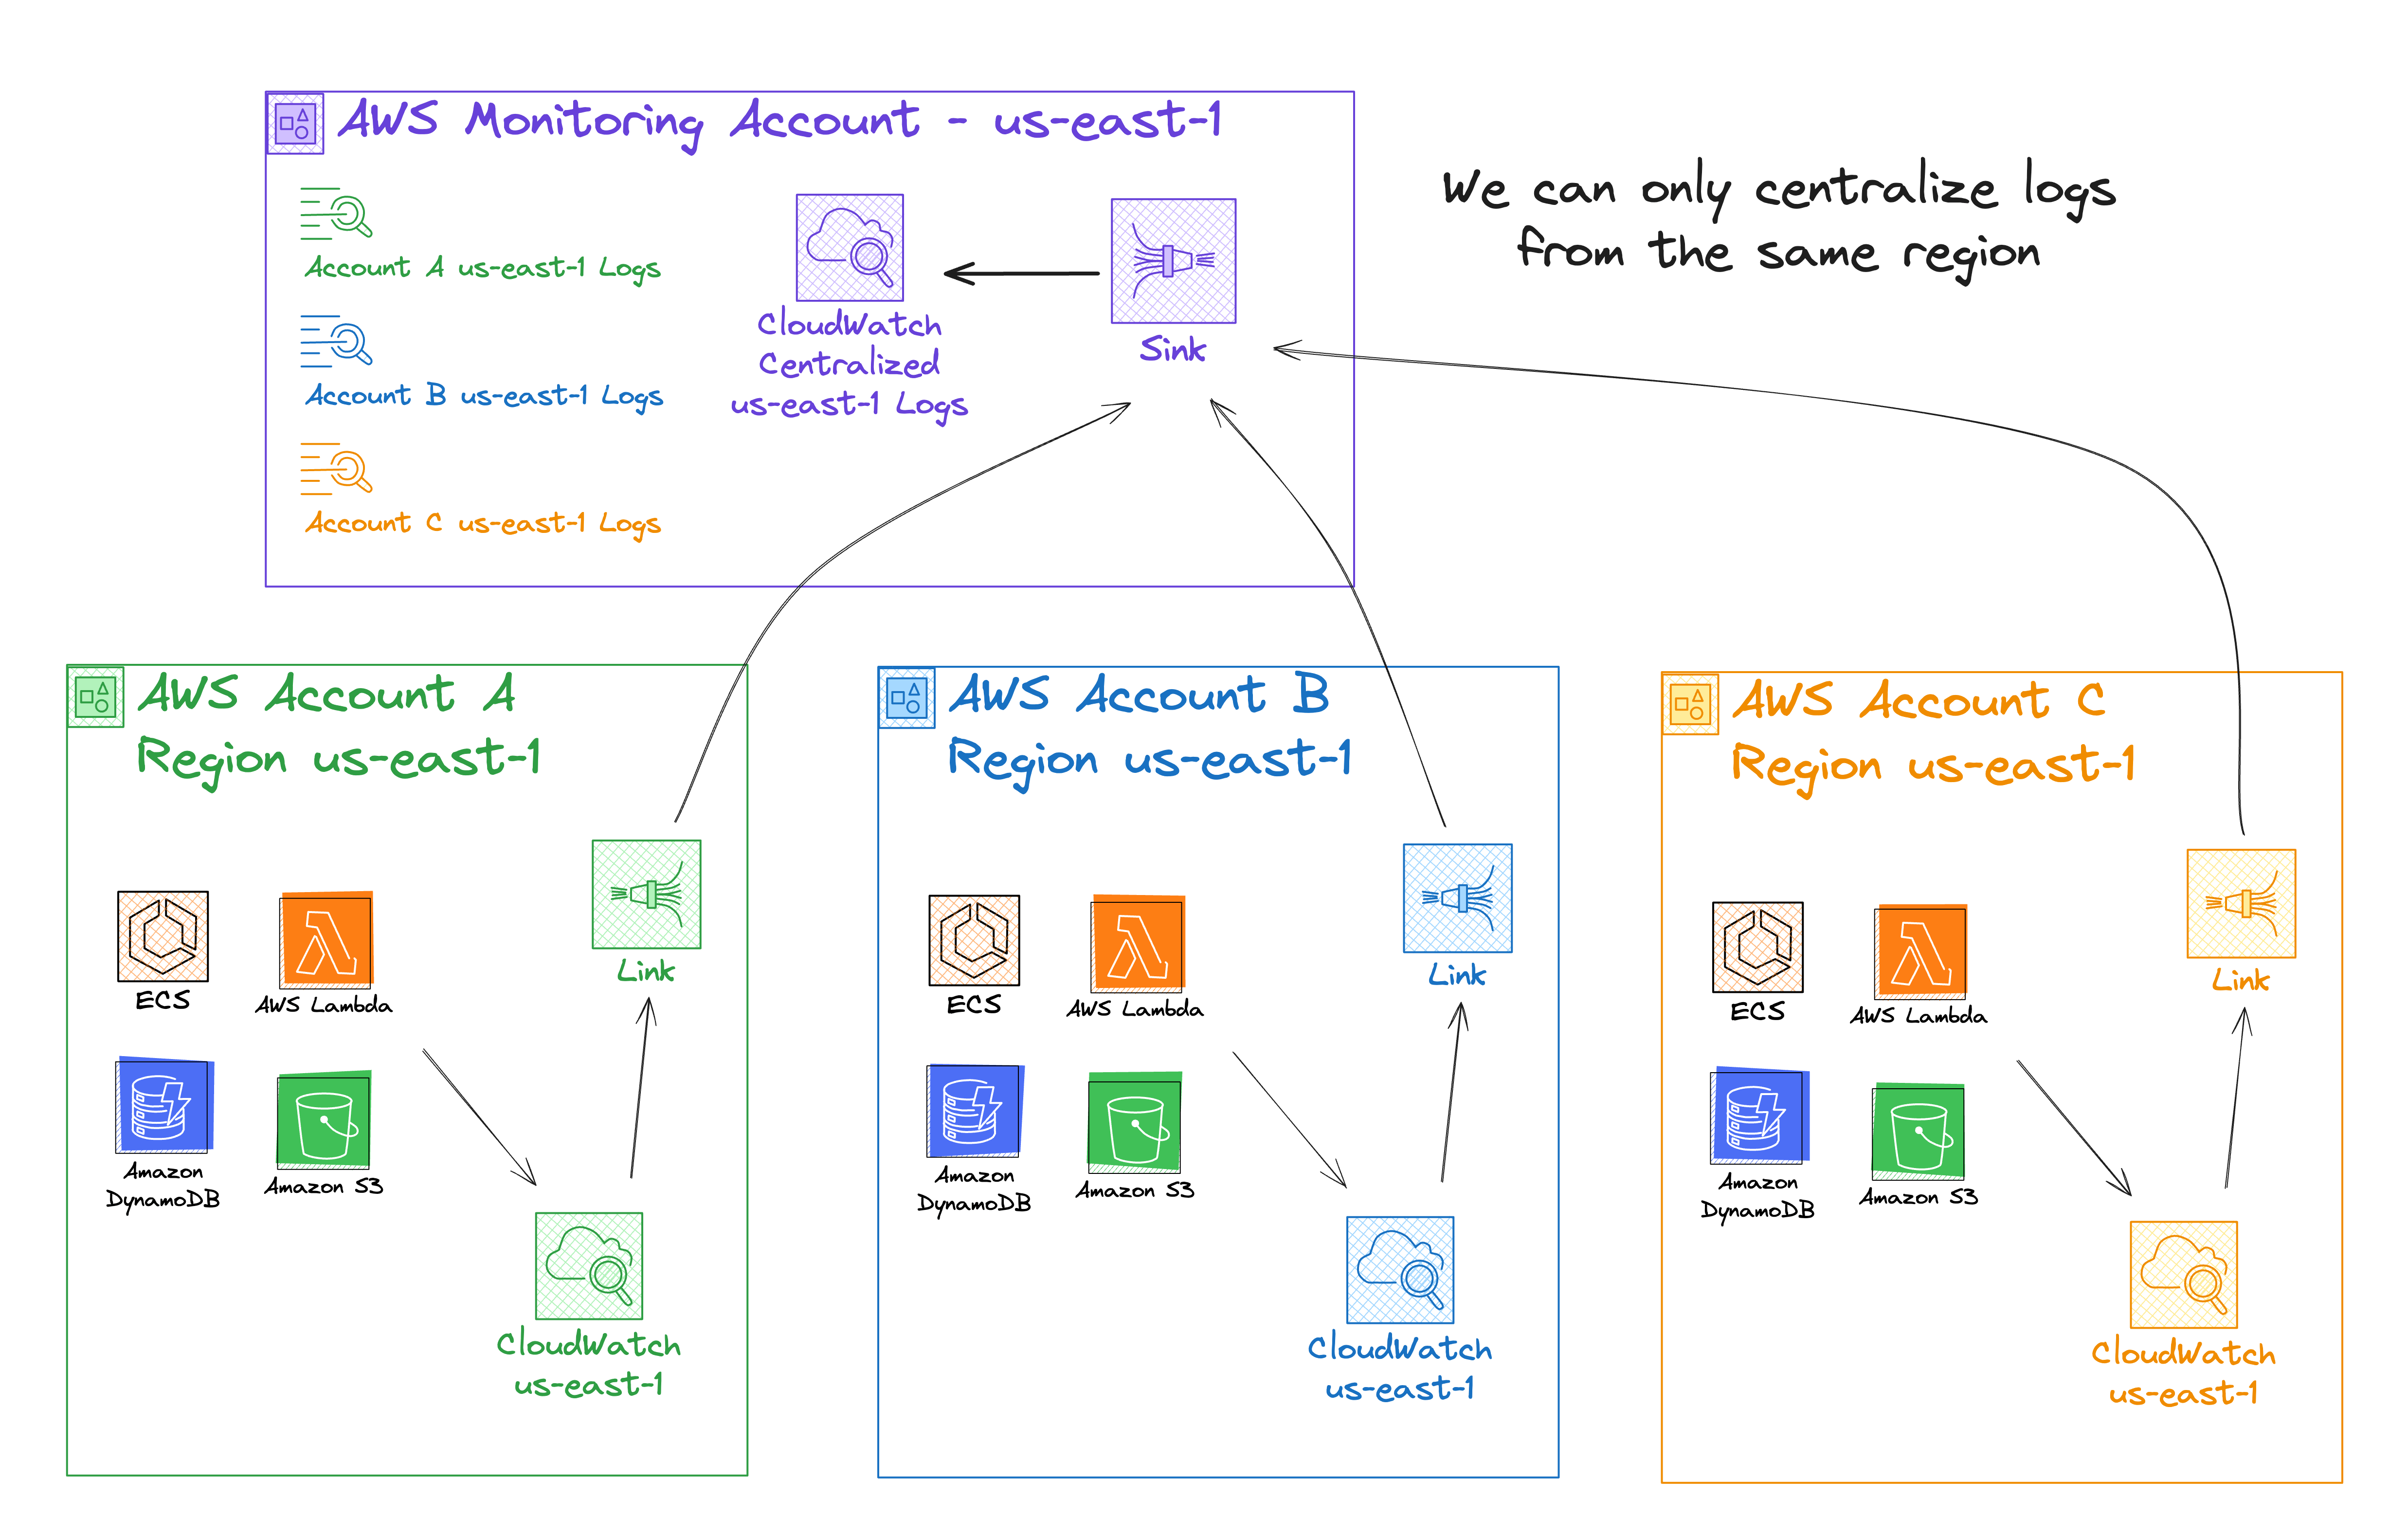 A diagram showing the centralized monitoring account receiving logs in a single region (us-east-1) from the same region (us-east-1) in all target accounts.